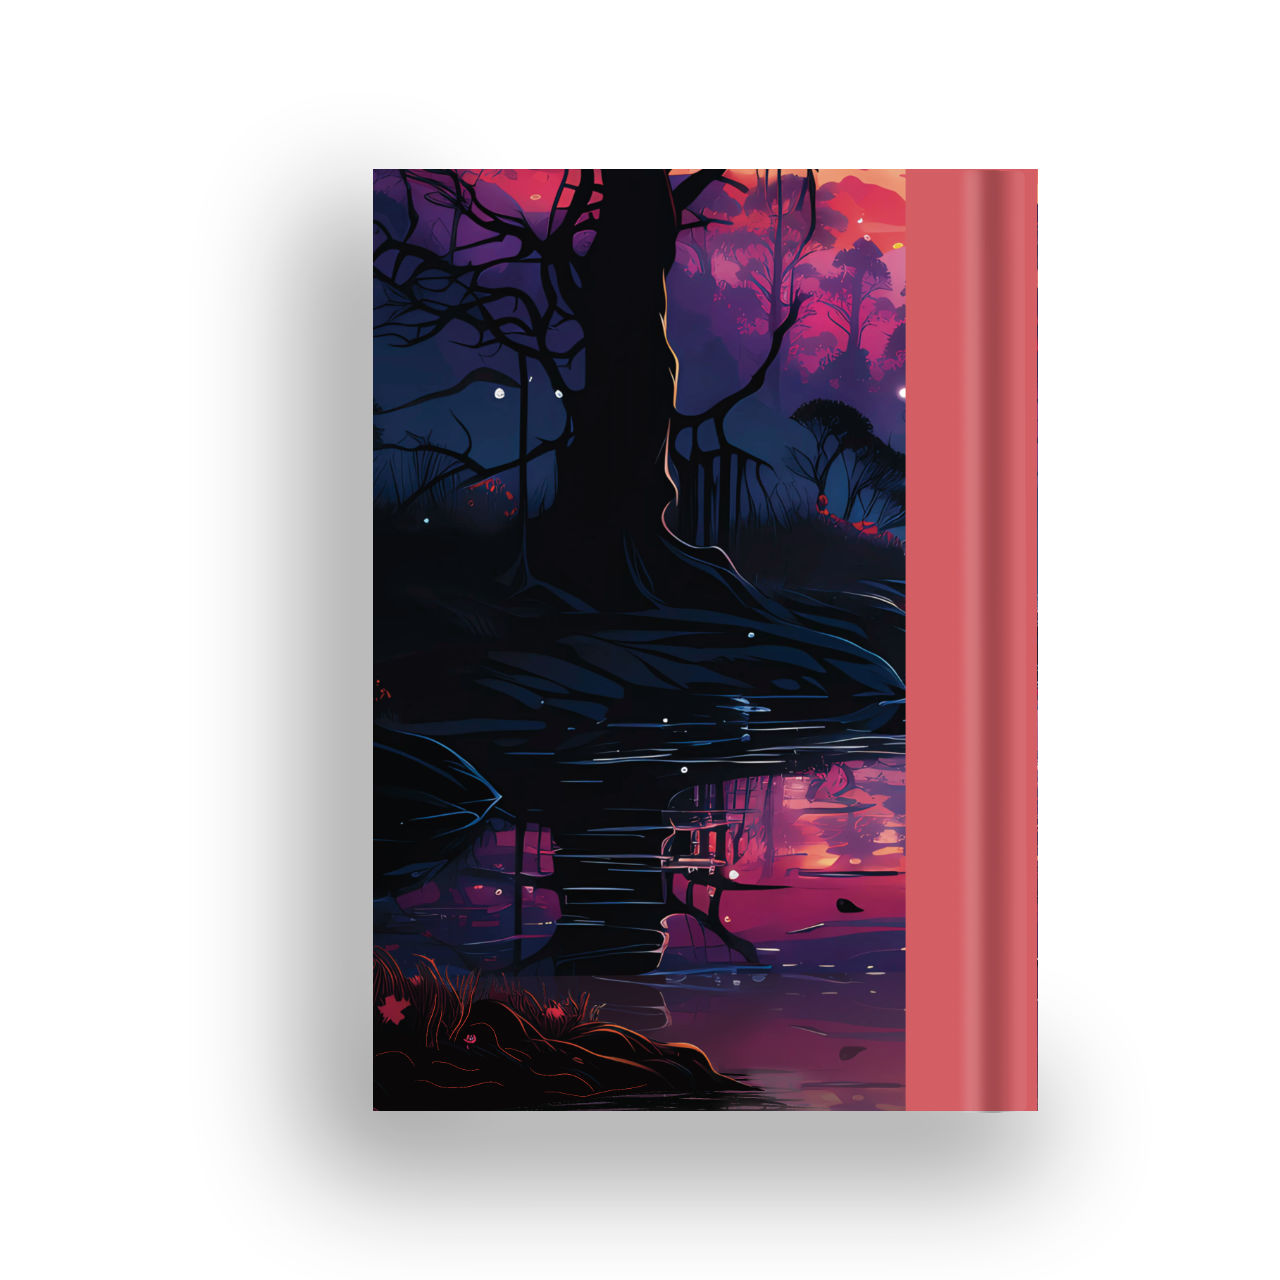 Forest of Dean notebook back cover featuring a serene forest landscape